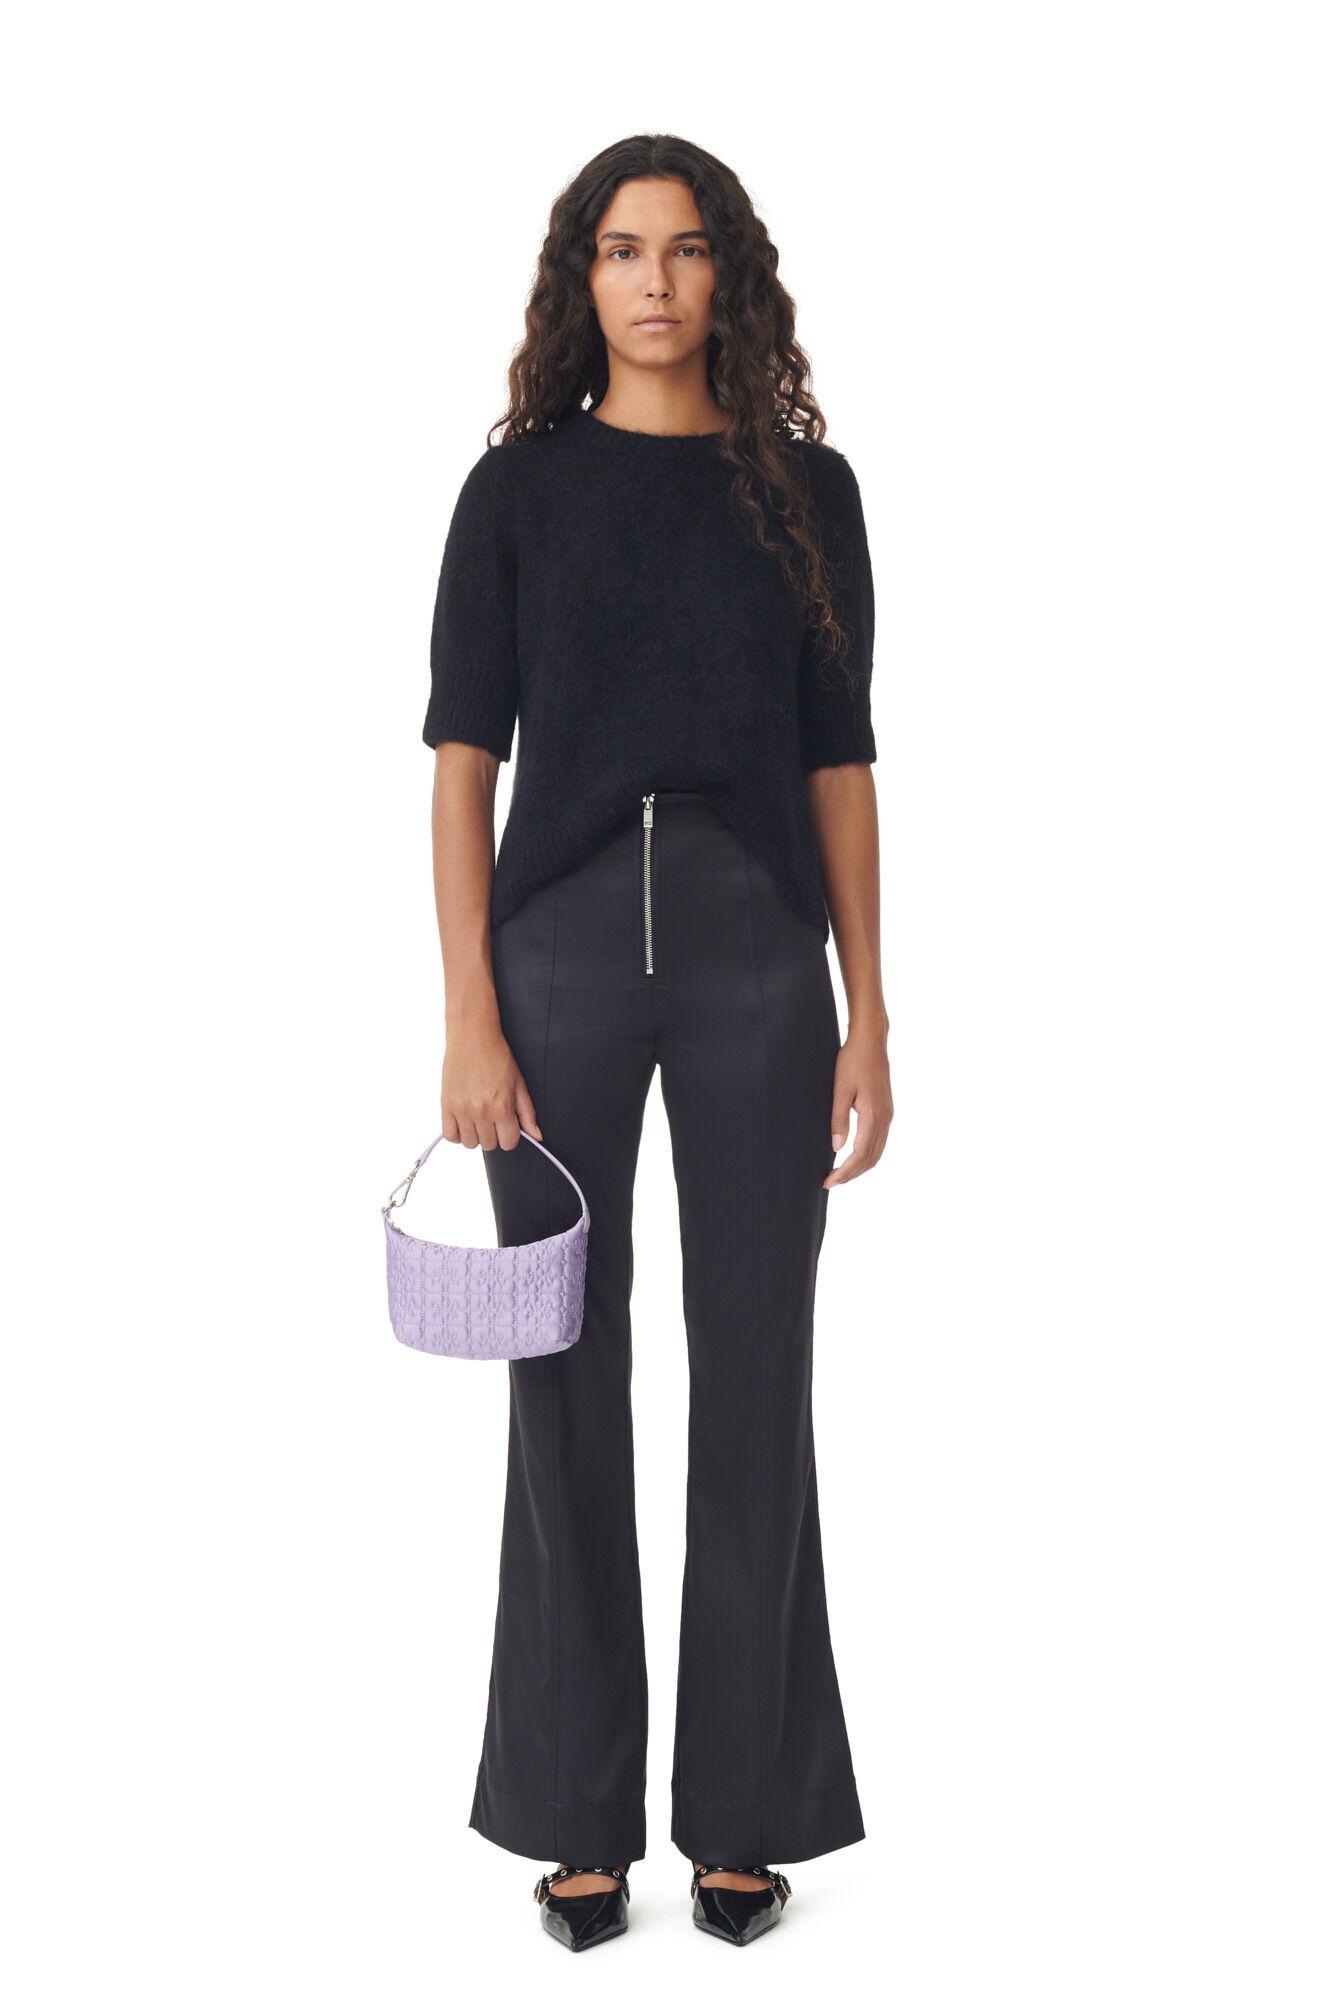 lace sheer flared trousers, GANNI